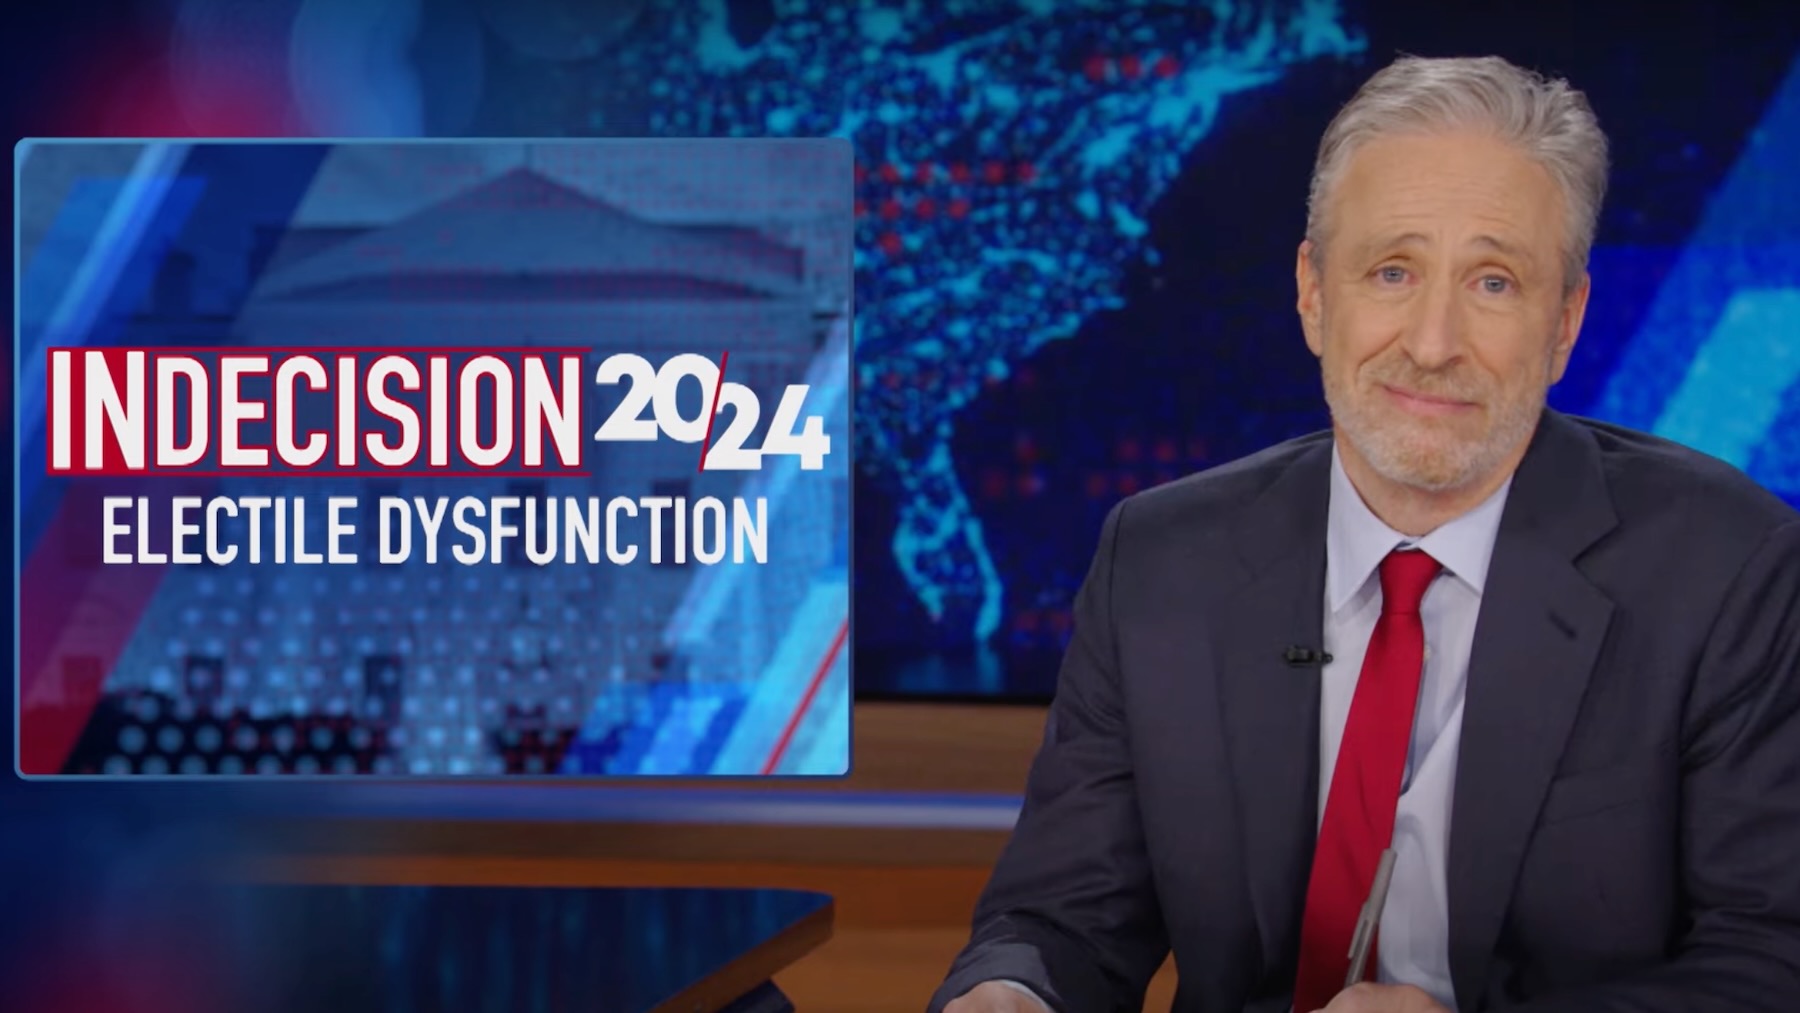 Jon Stewart Returns to The Daily Show After Nine Years: Watch His Opening Monologue